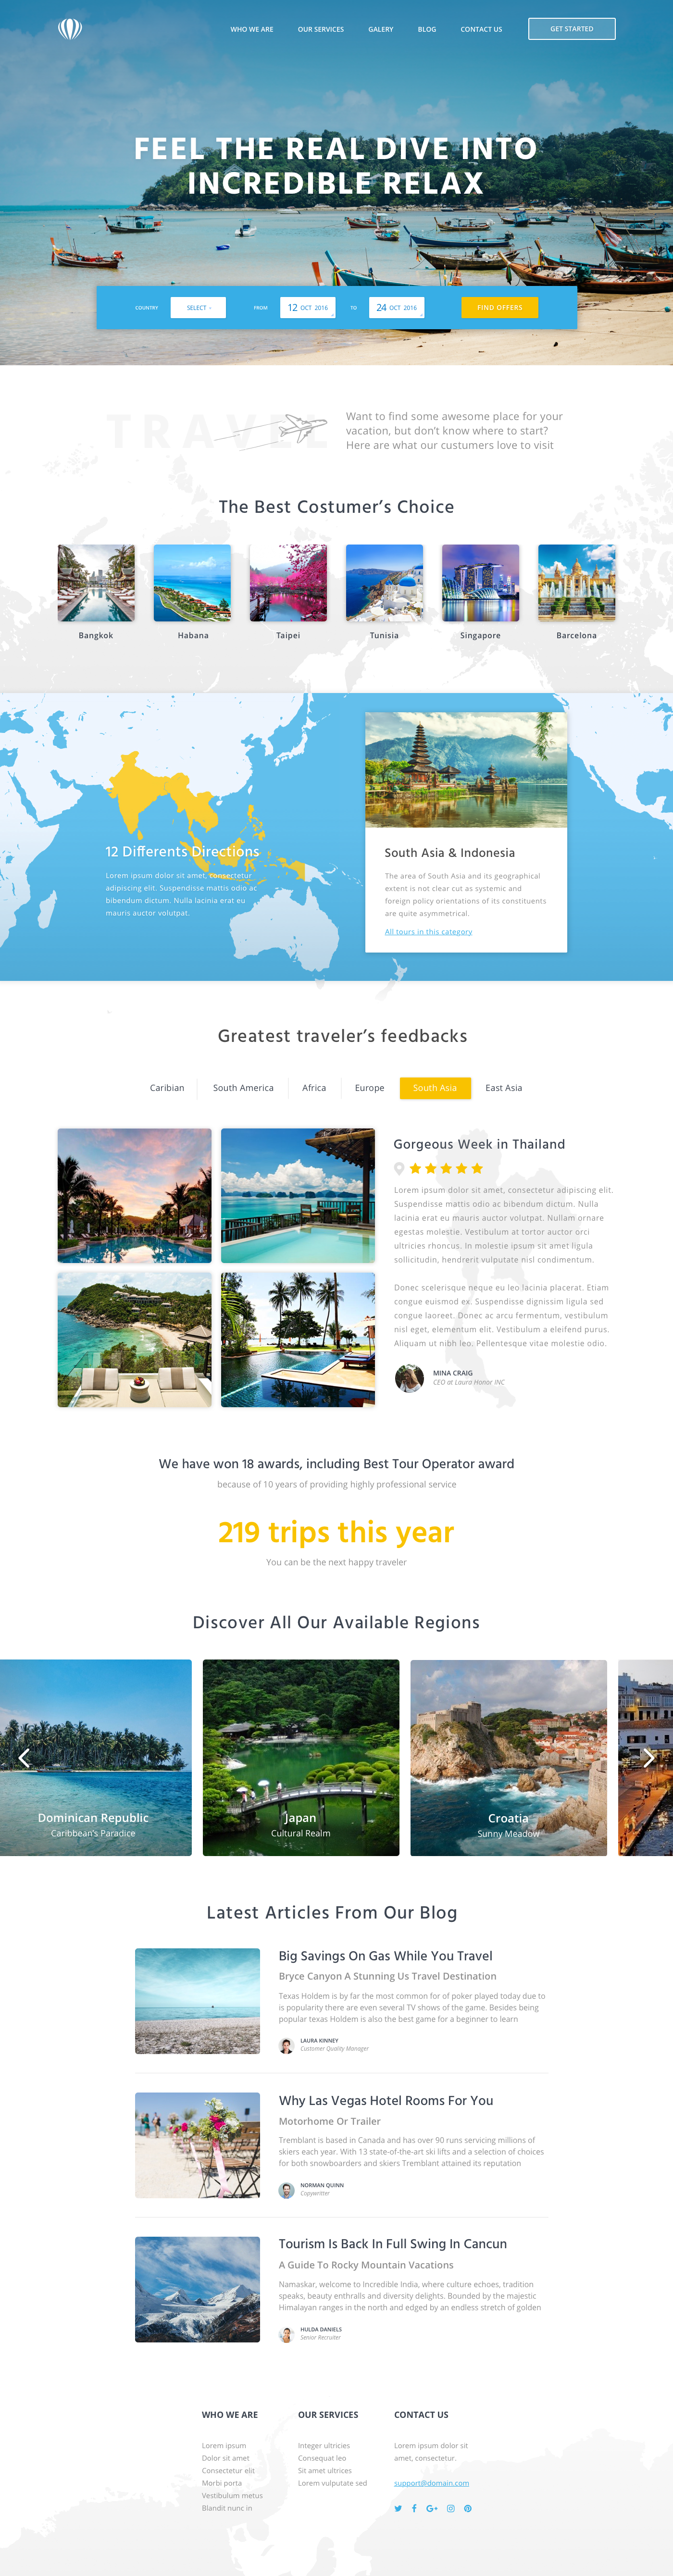 design ux UI Website Travel journey trip tour vacation Holiday